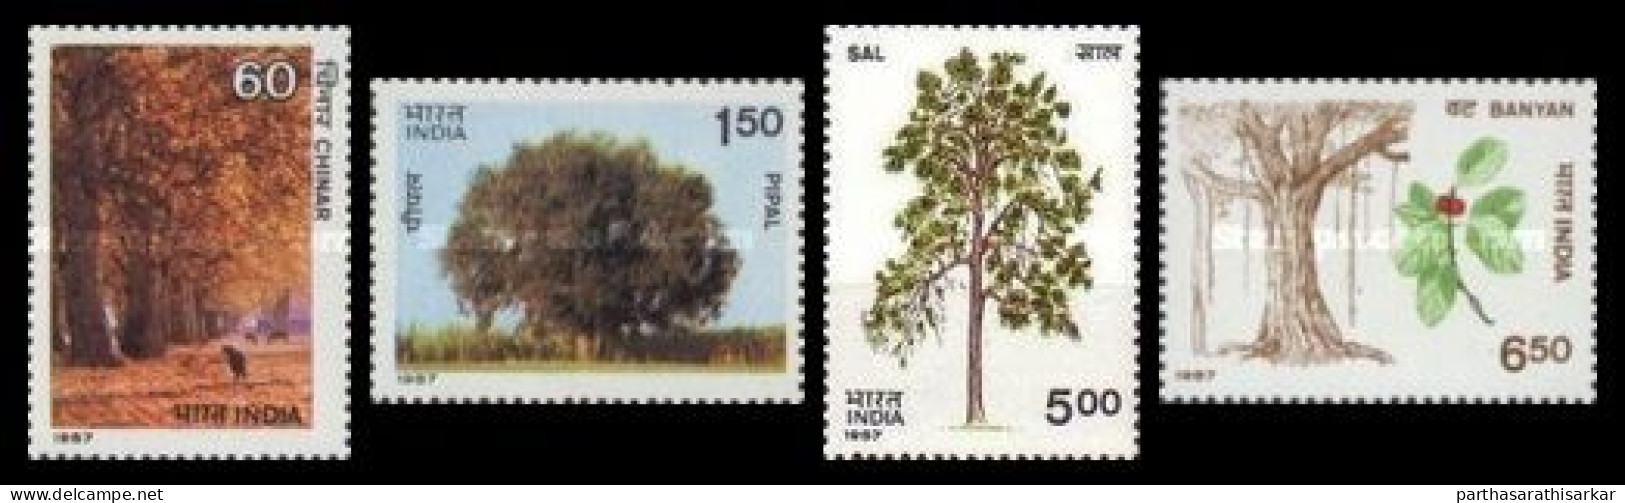 INDIA 1987 INDIAN TREES NATURE COMPLETE SET MNH - Neufs